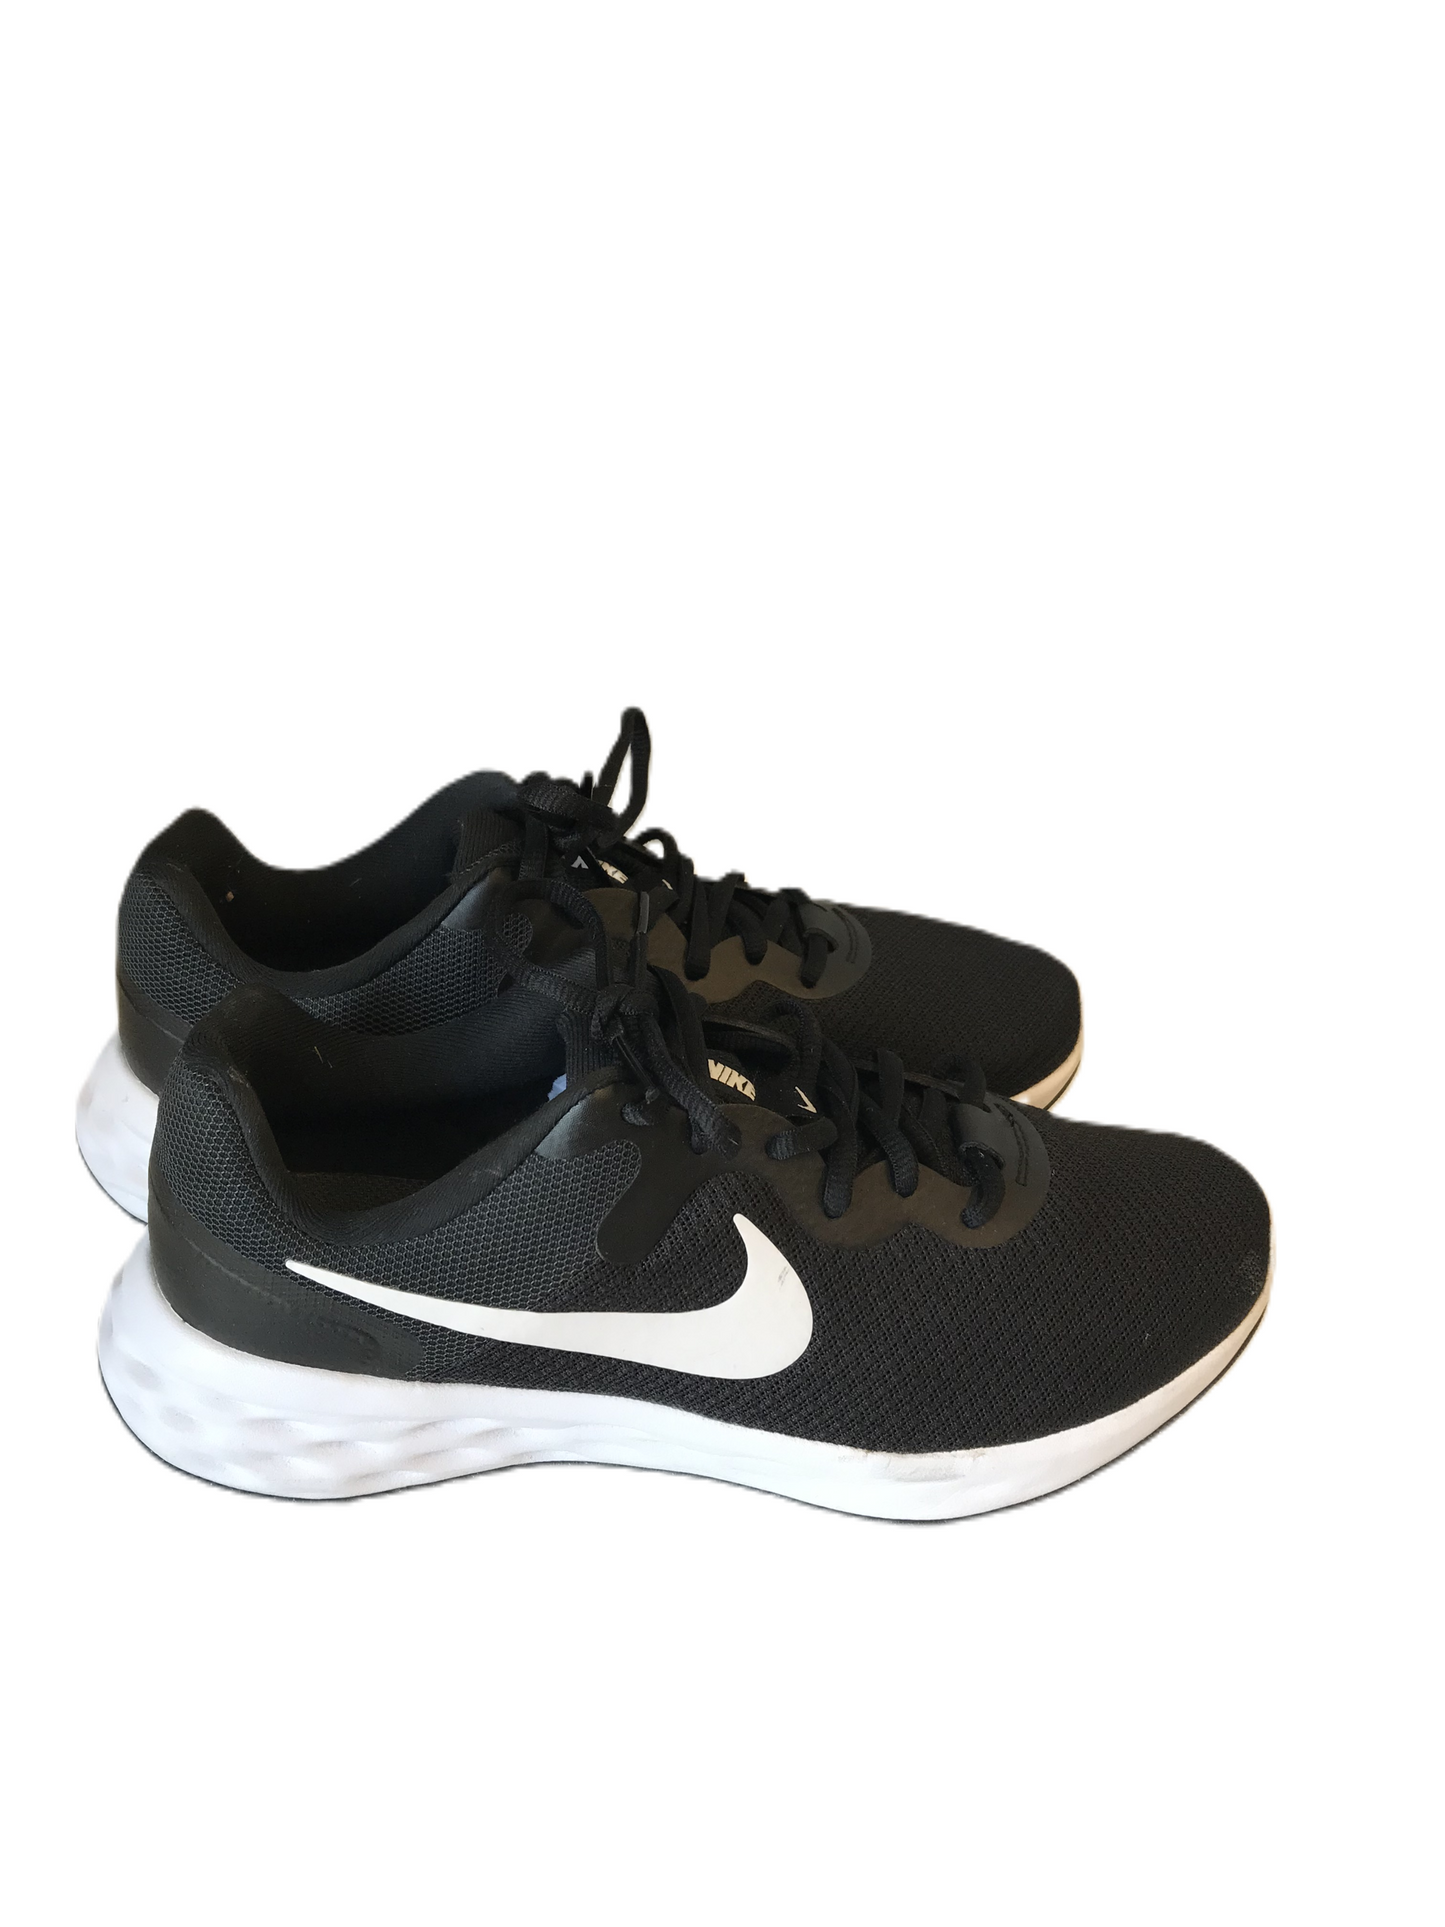 Black Shoes Athletic By Nike, Size: 8.5